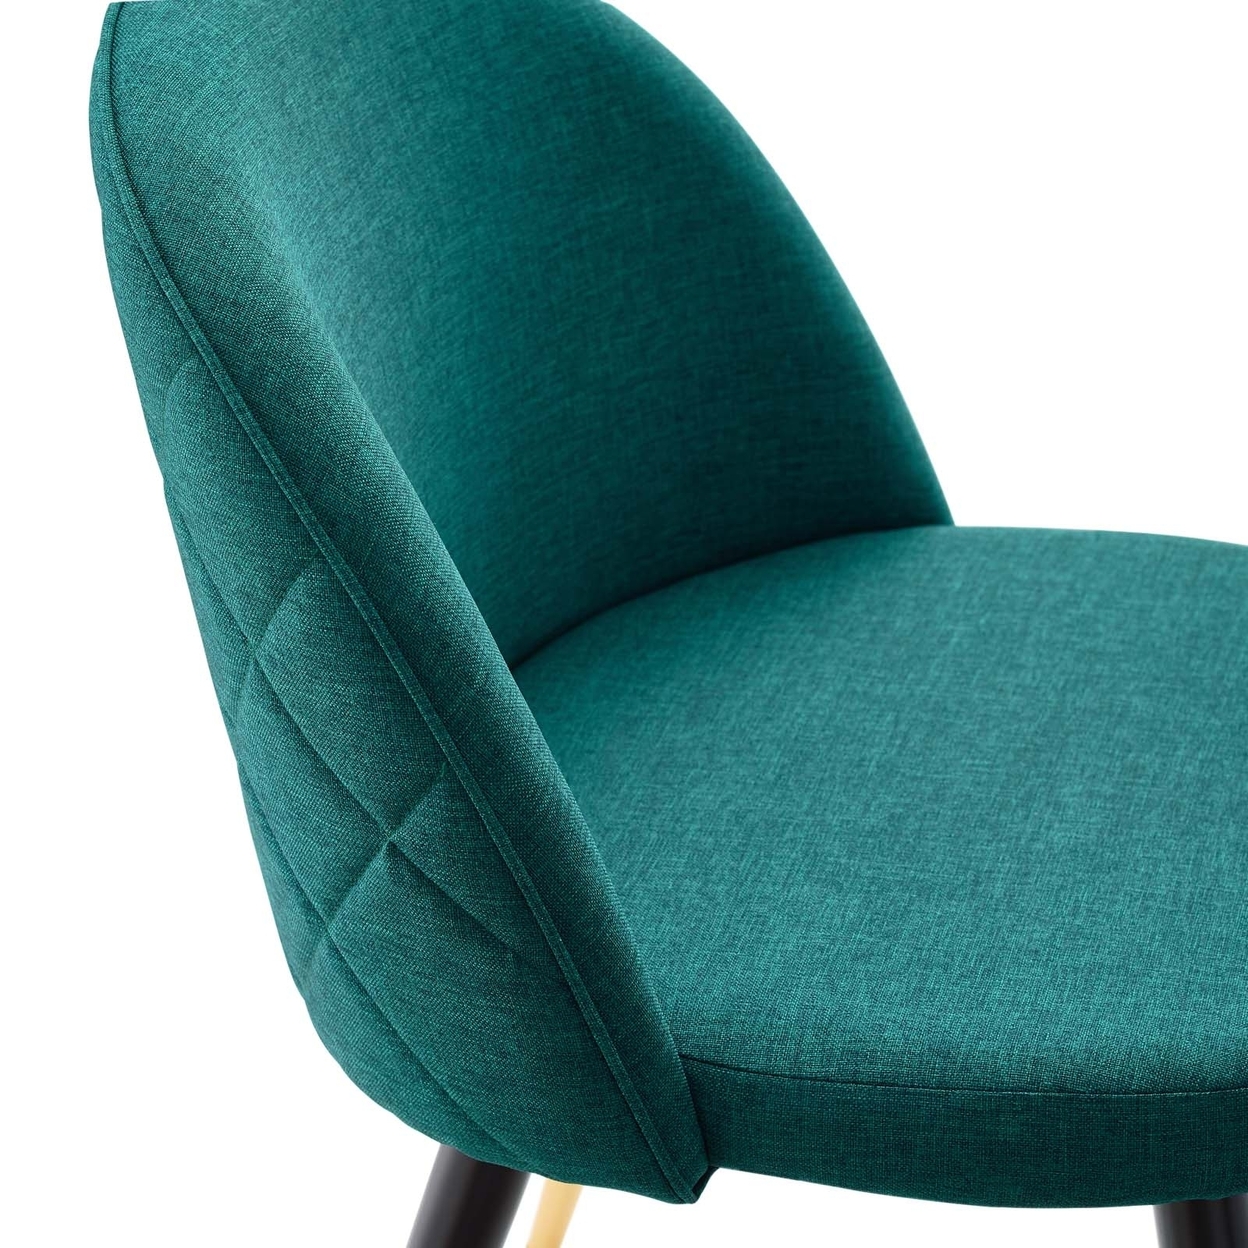 Cordial Dining Chairs - Set Of 2, Teal